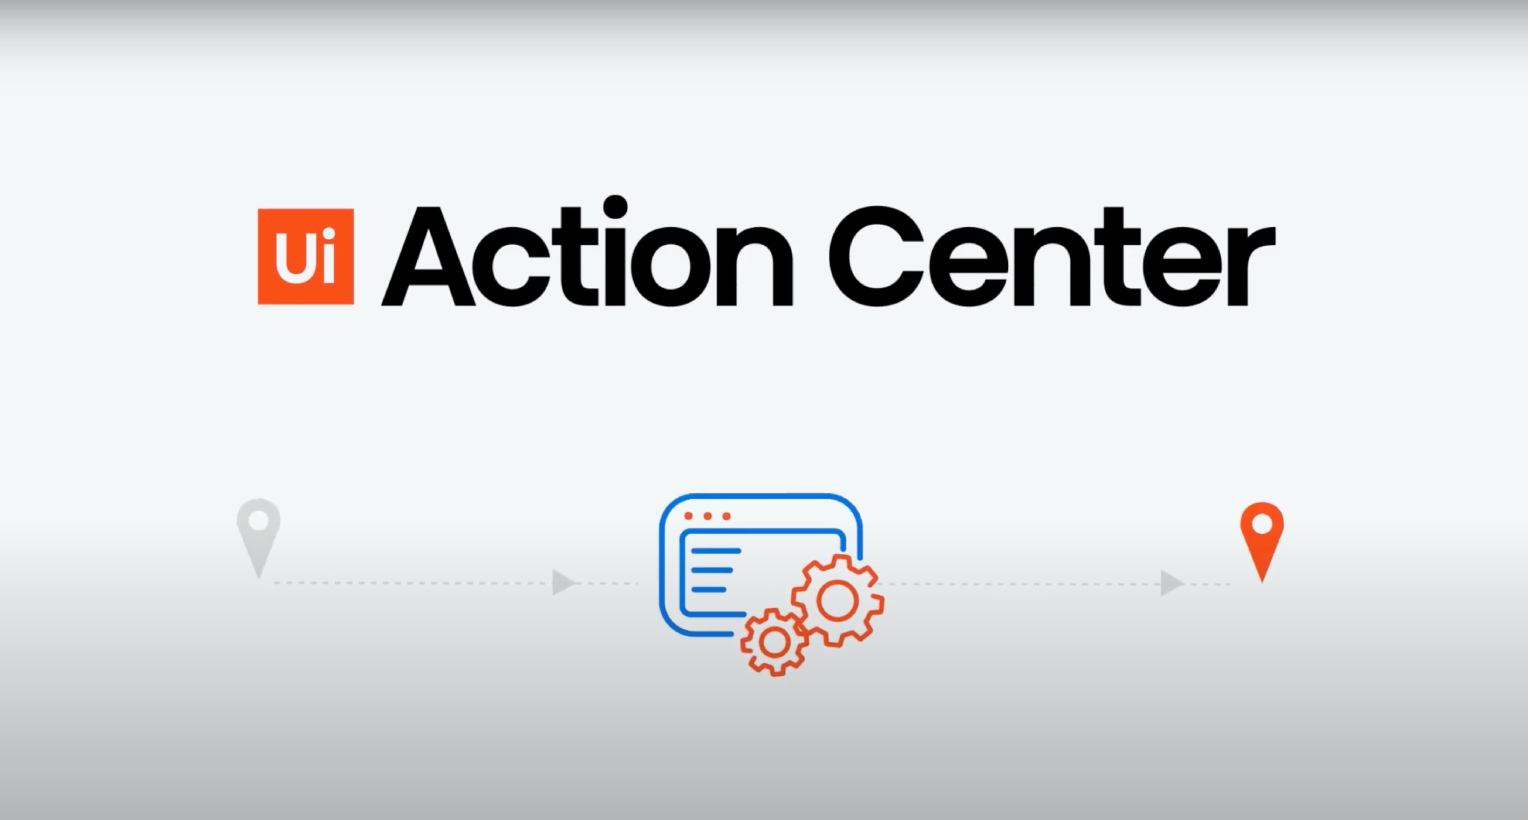 Scale your RPA with UiPath Action Center